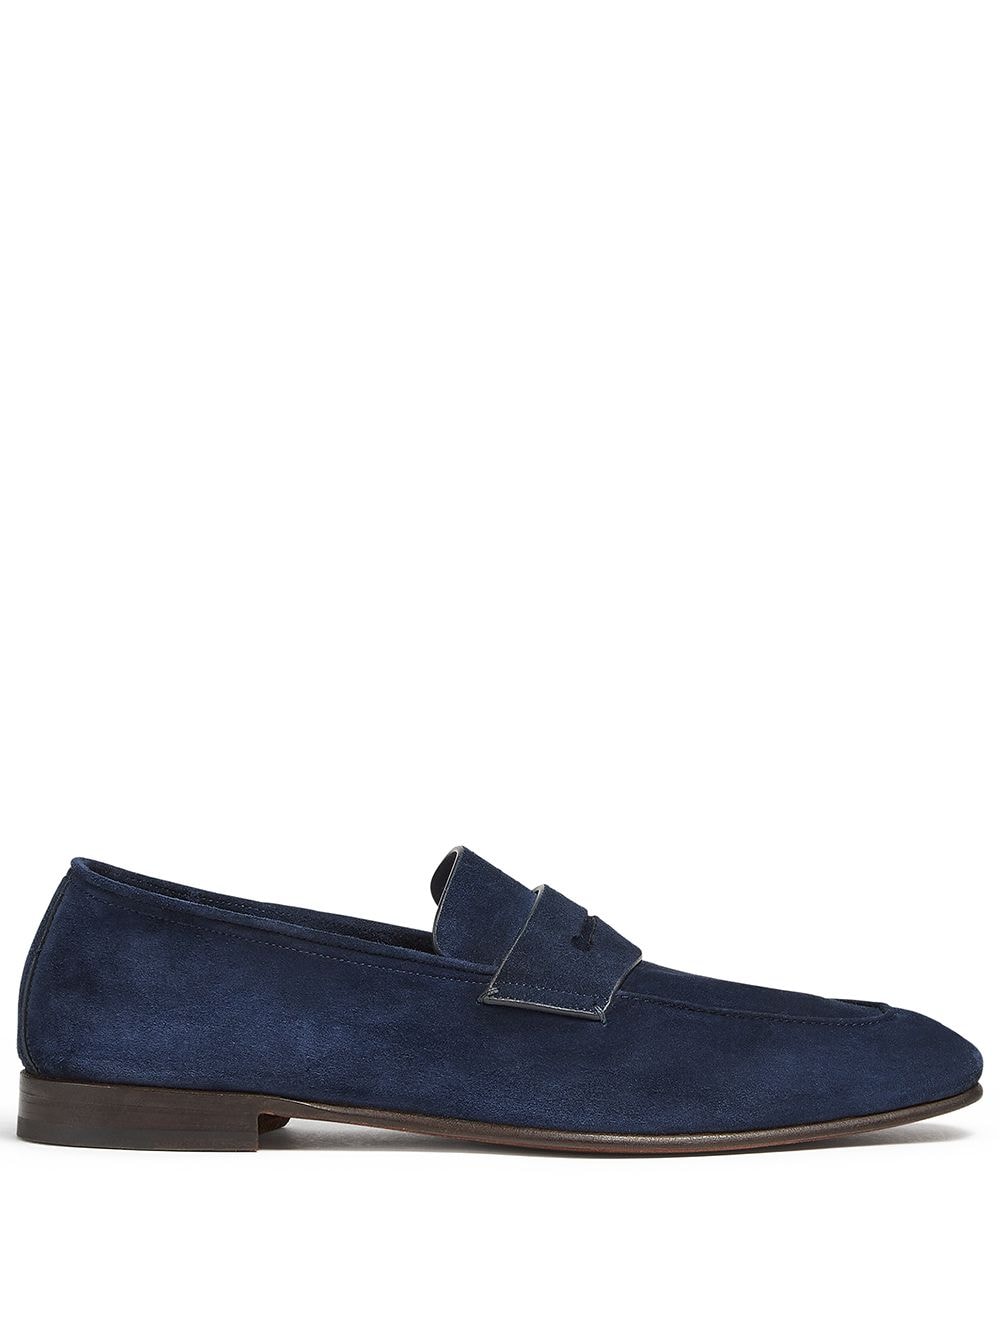 Zegna Suede Penny Loafers - Farfetch